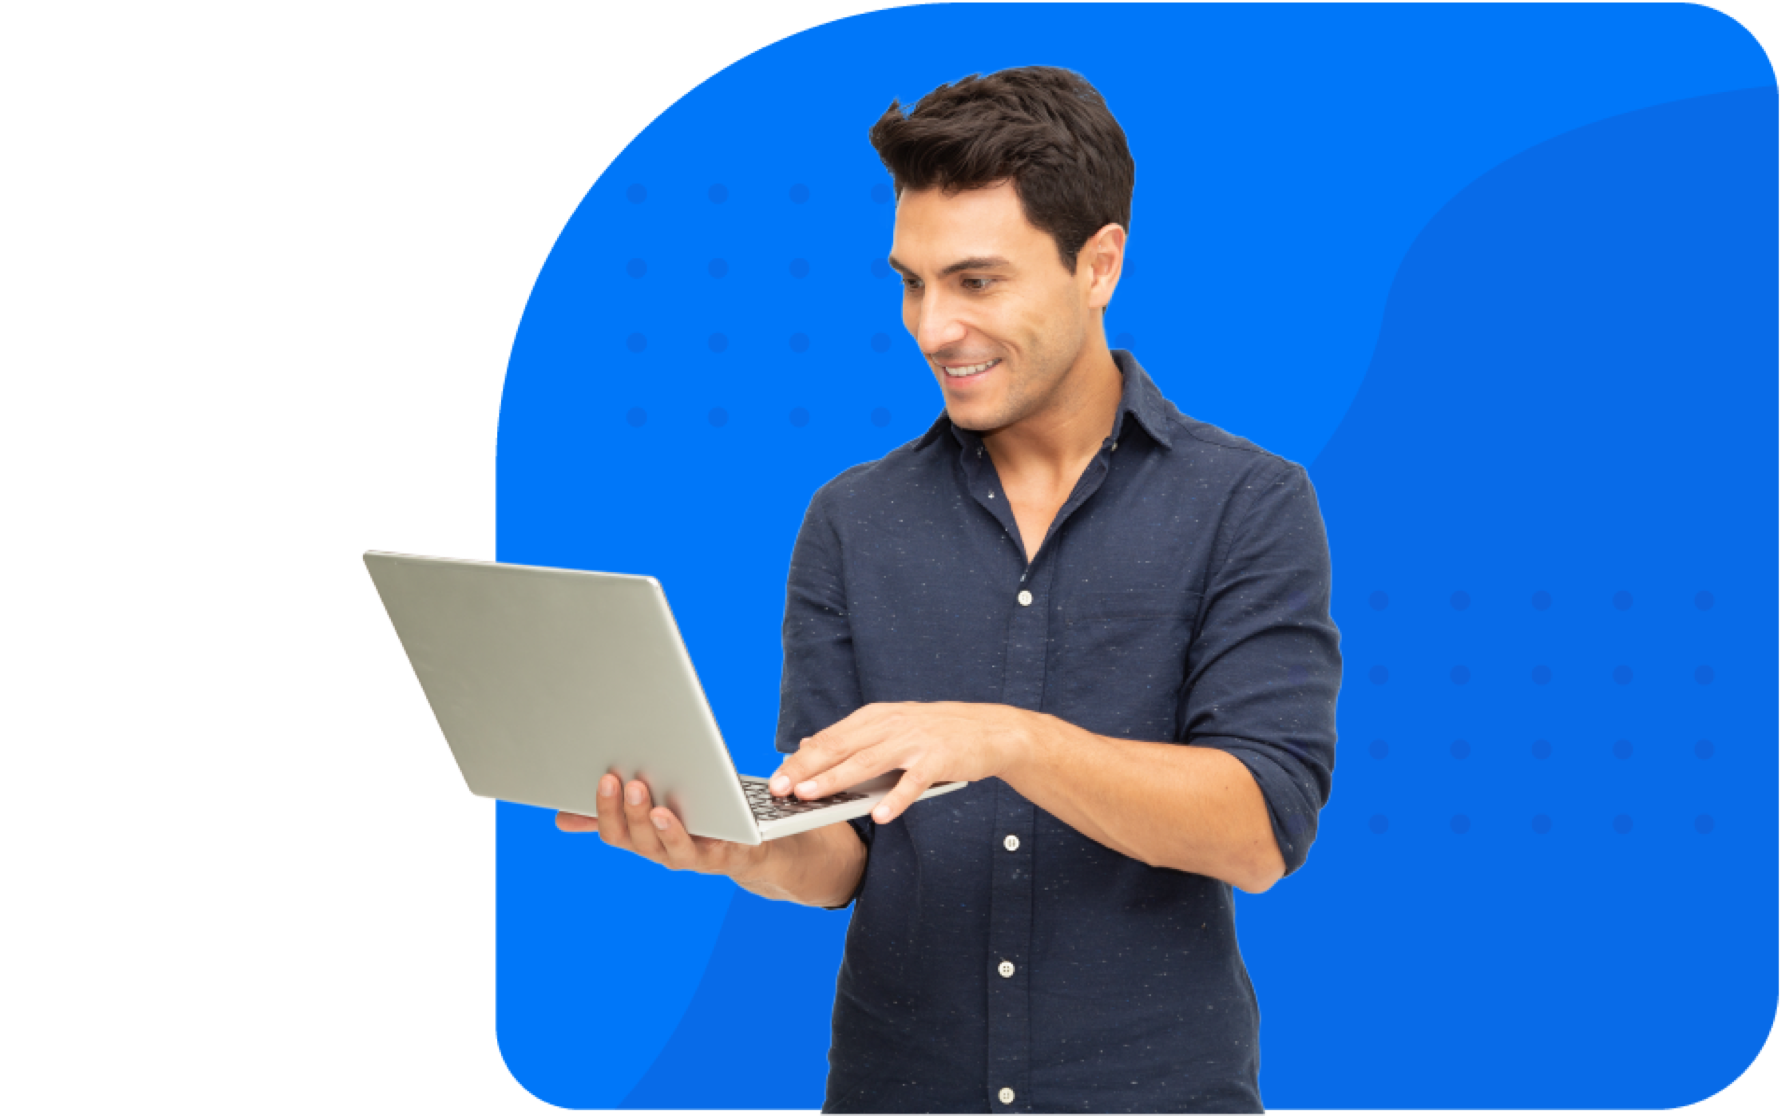 Smiling man standing with laptop in hands